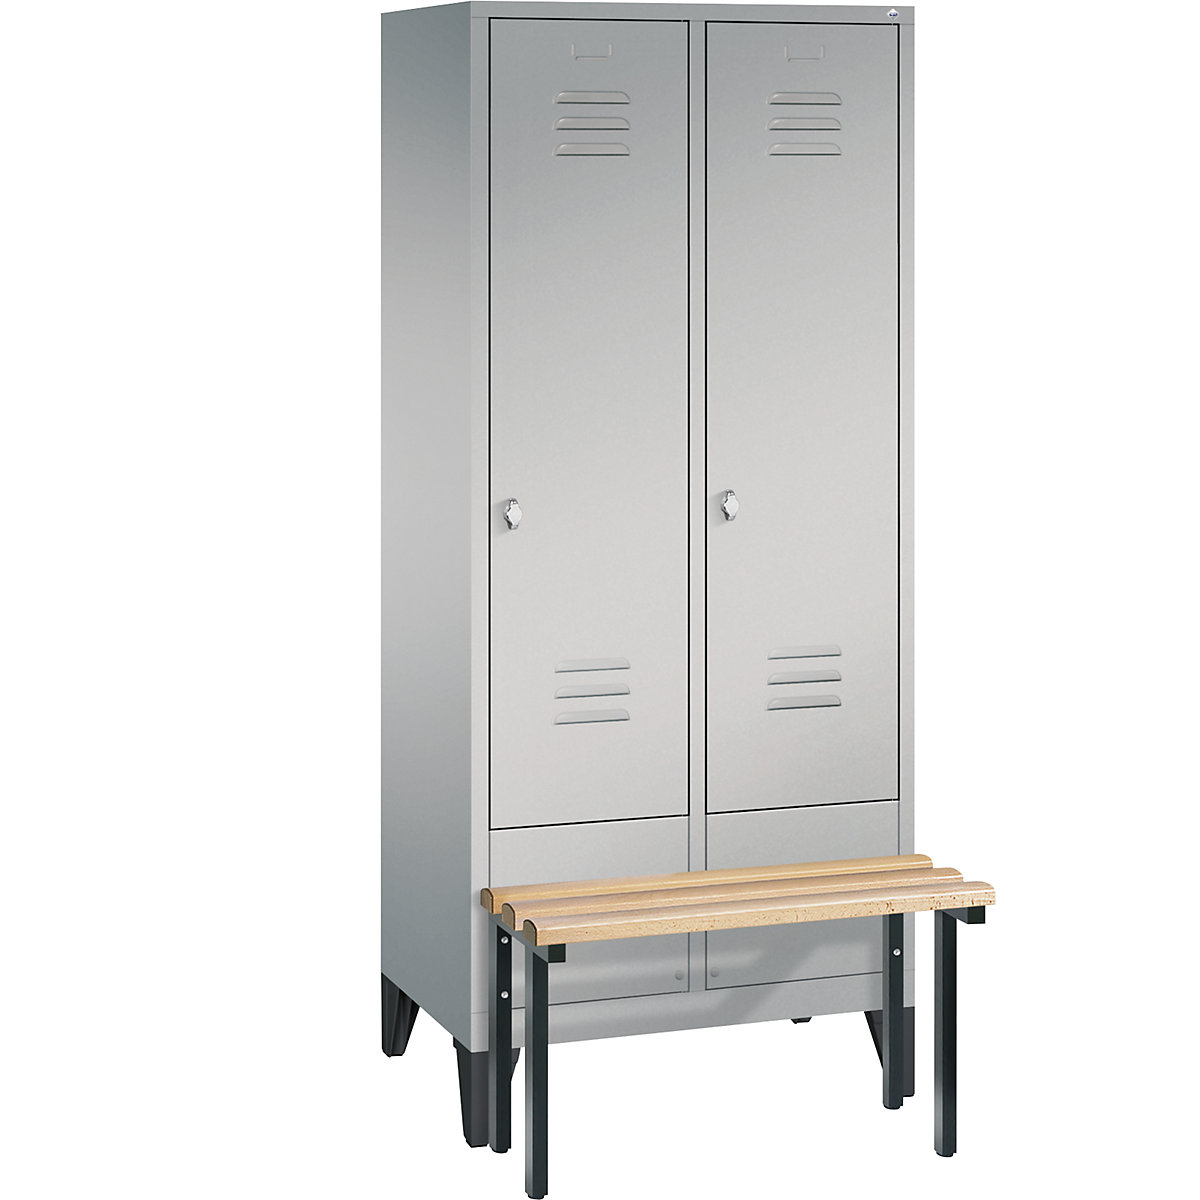 CLASSIC cloakroom locker with bench mounted in front – C+P, 2 compartments, compartment width 400 mm, white aluminium-10